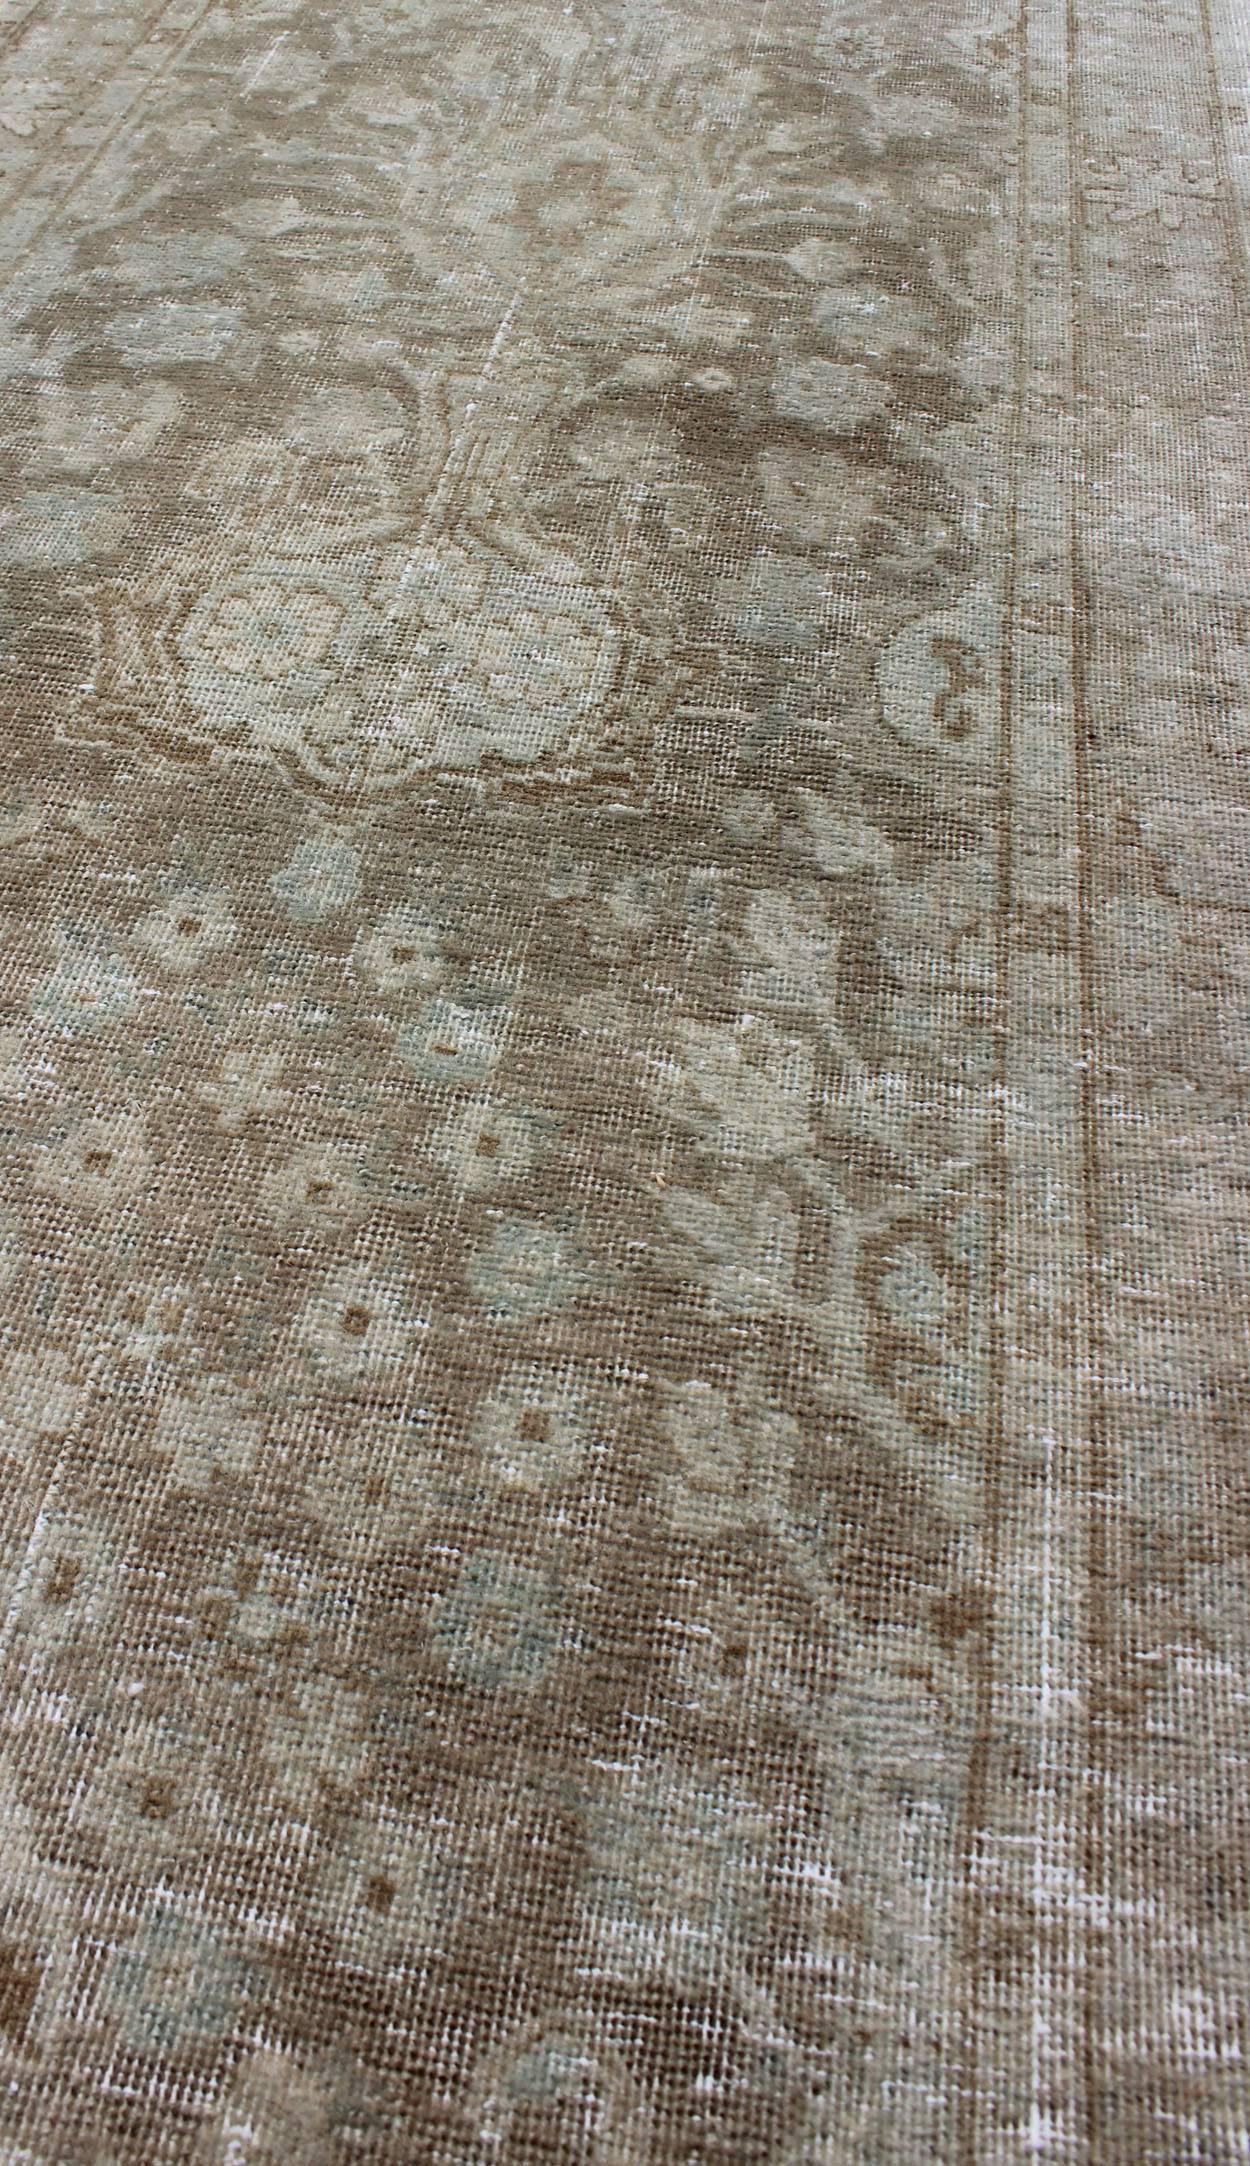 Long & Narrow Tabriz Runner with Taupe, Soft Blue and Light Brown Floral Design. rug/ KBE-H-503-09. Vintage Tabriz runner This antique Persian Tabriz runner with a sophisticated design features a unique color combination with tan, soft blue and